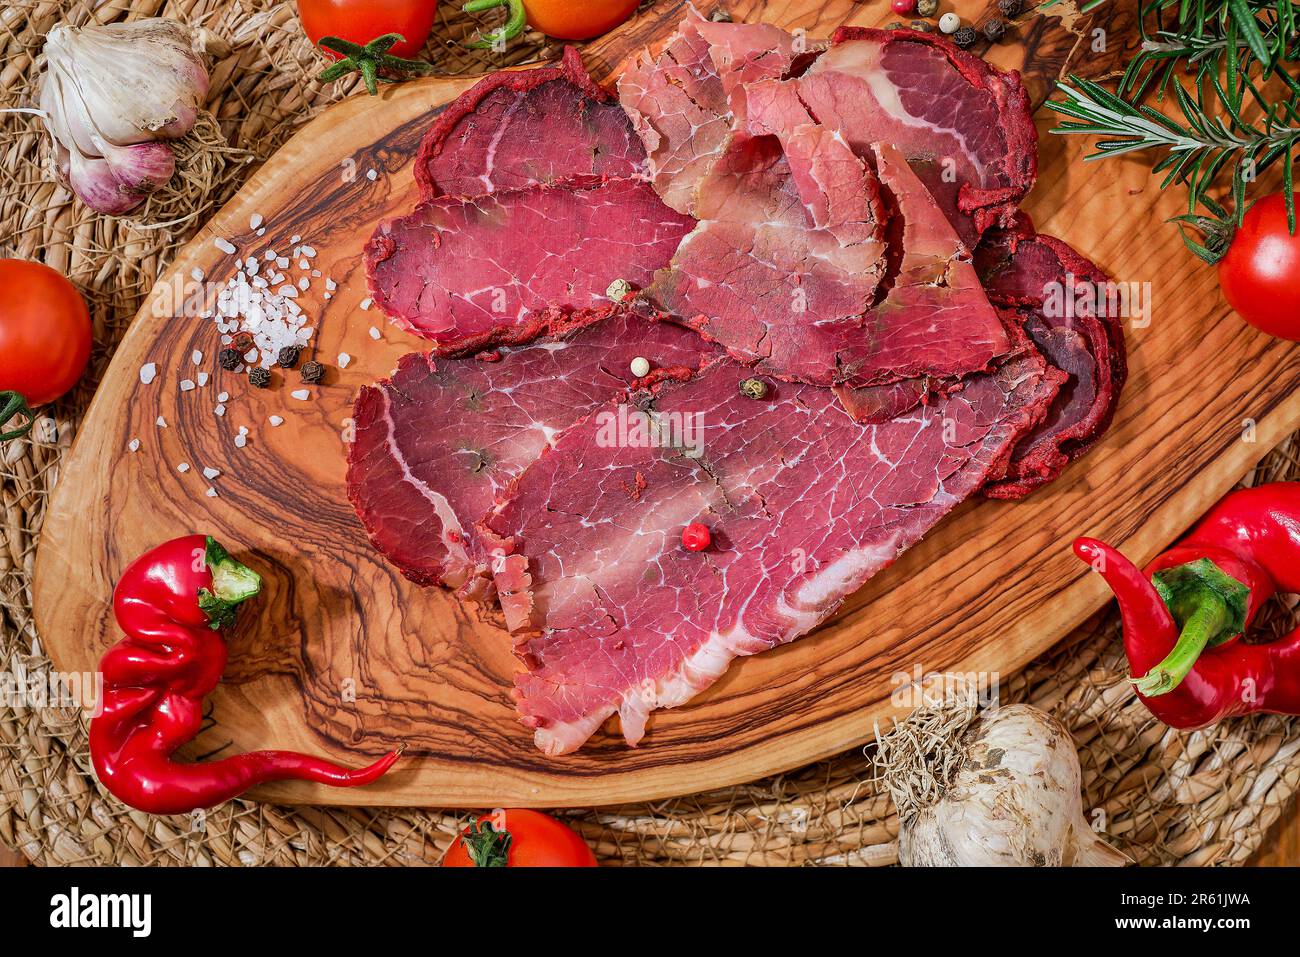 Cured meat, bacon or Turkish pastirma on cutting board with vegetables and spices, meat dish traditional Turkish food for sunday breakfast Stock Photo